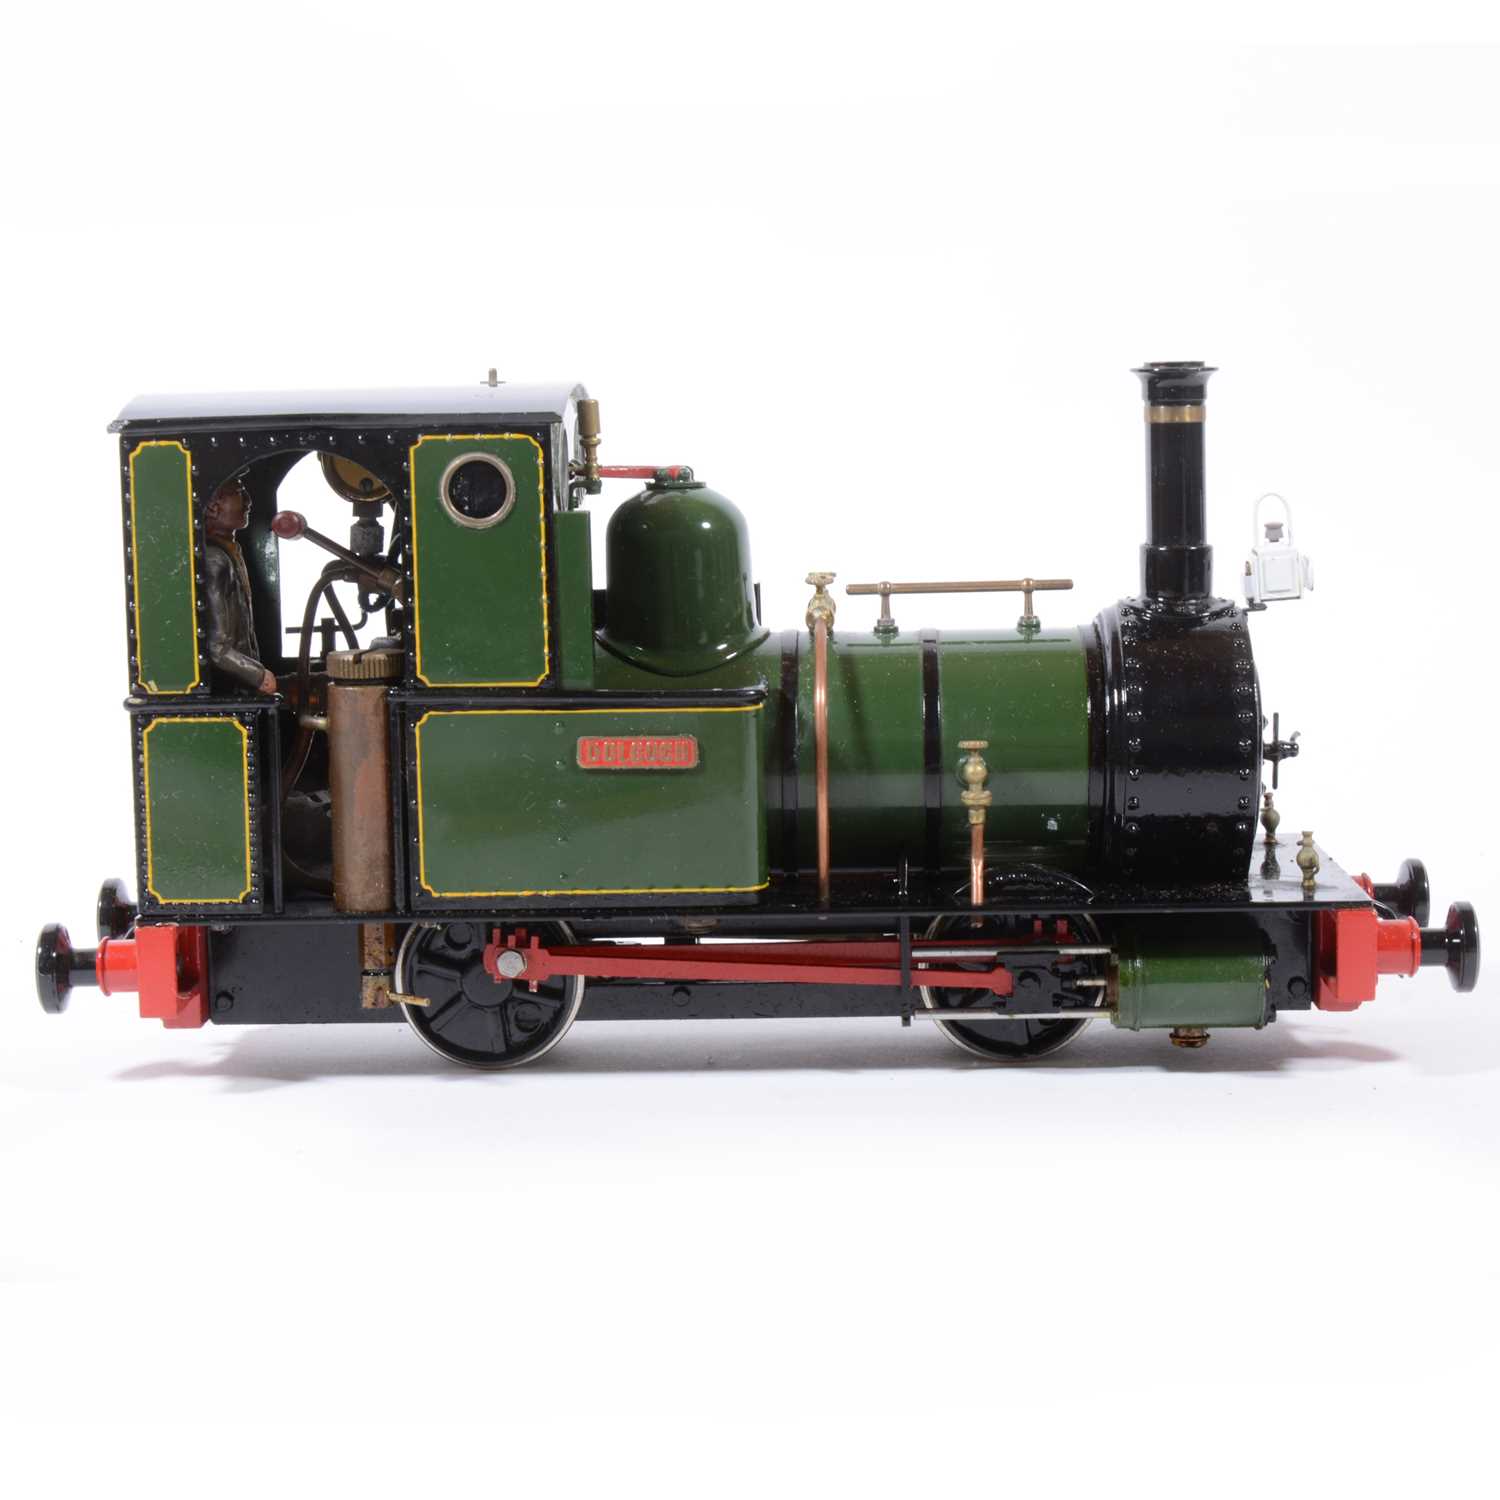 62 - Finescale Engineering Comany live steam locomotive, gauge 1 / G scale, 32mm, 0-4-0, 'Dolgoch' Fletcher Jennings loco, green, with booklet, in case.